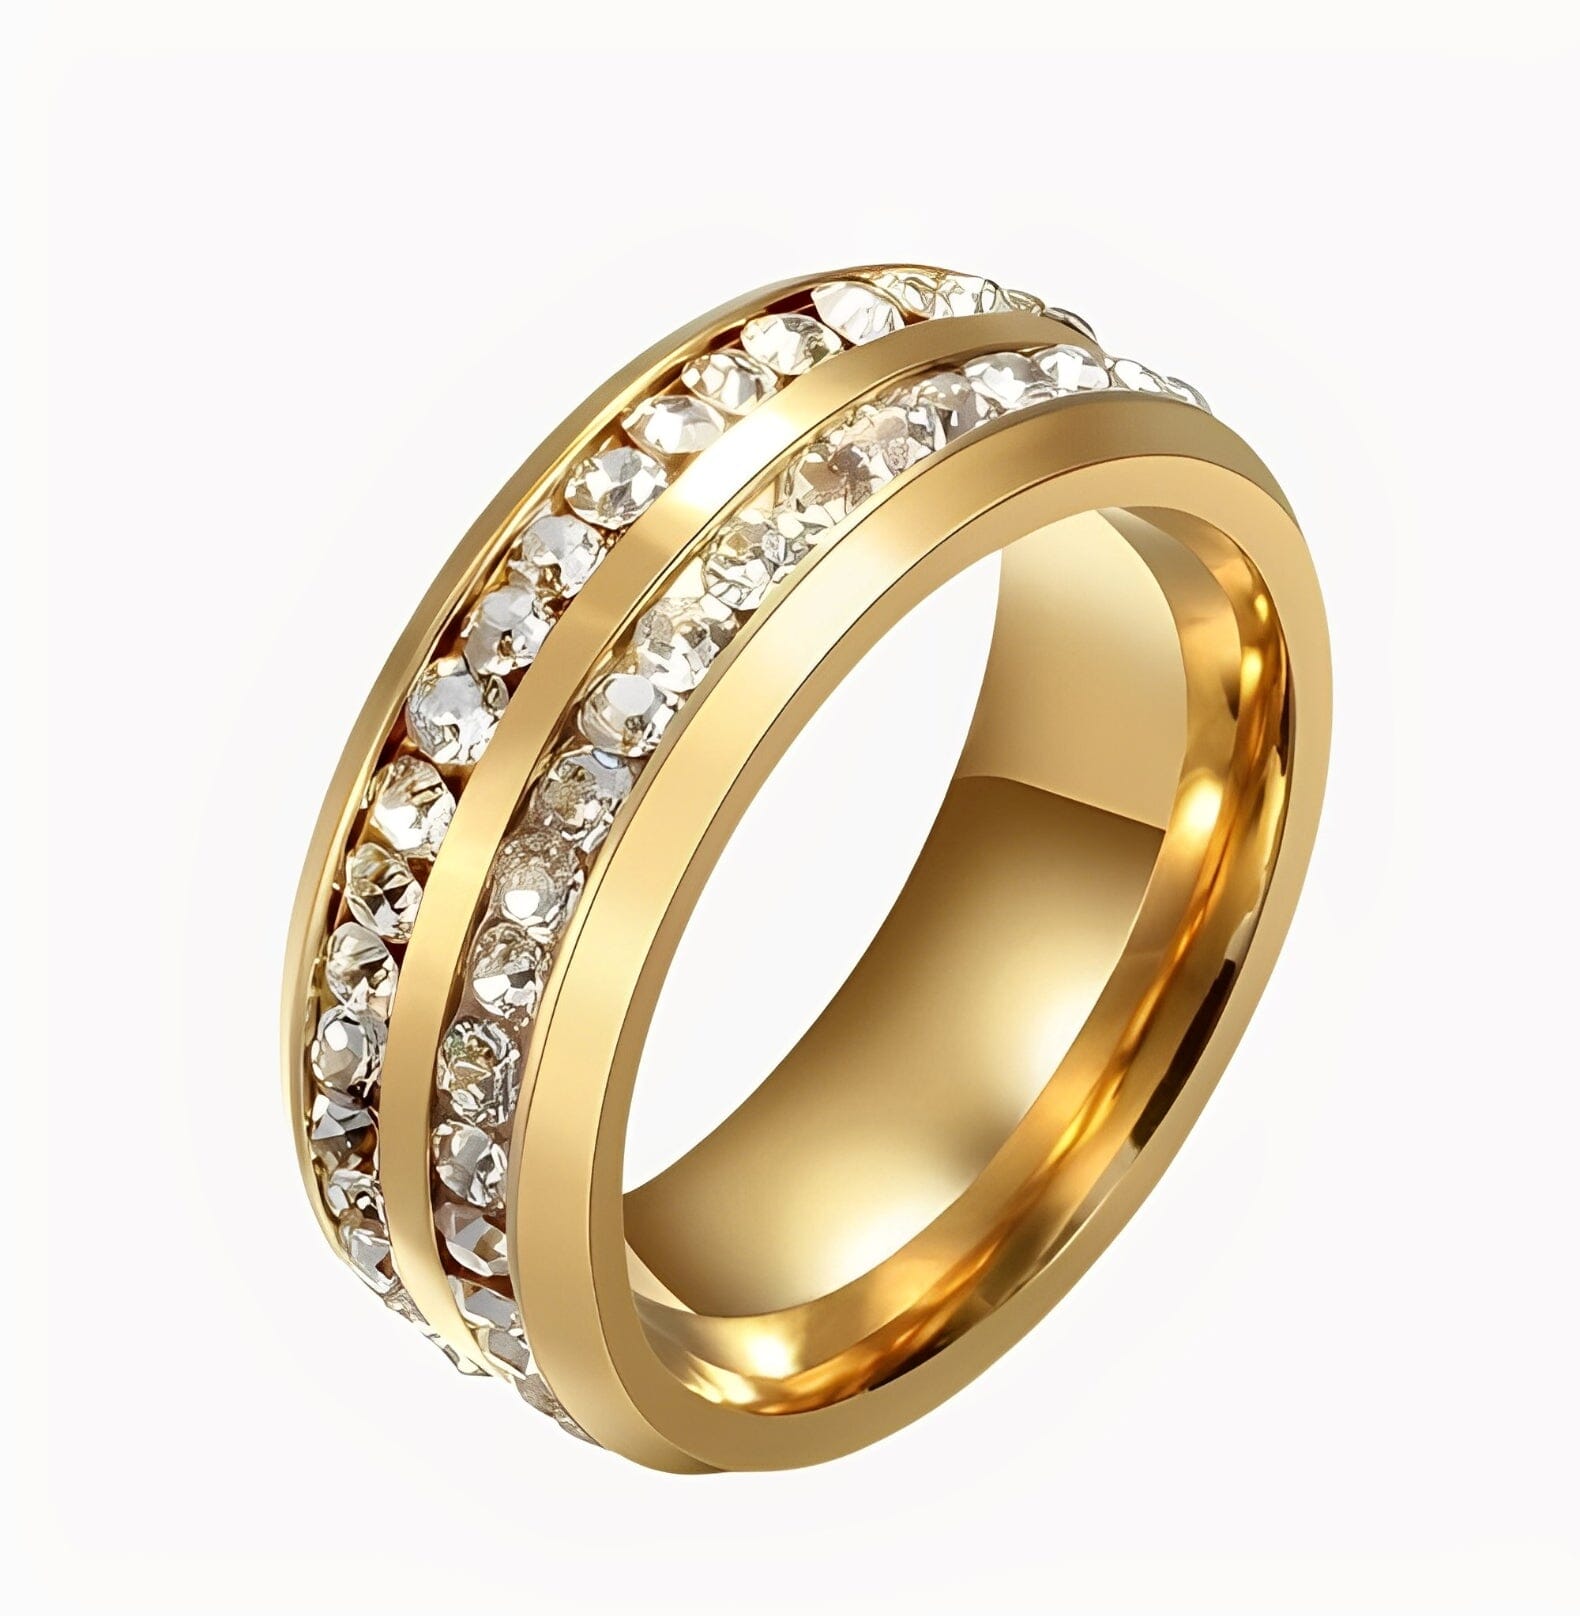 DIAMOND DOUBLE BAND RING ring Yubama Jewelry Online Store - The Elegant Designs of Gold and Silver ! 